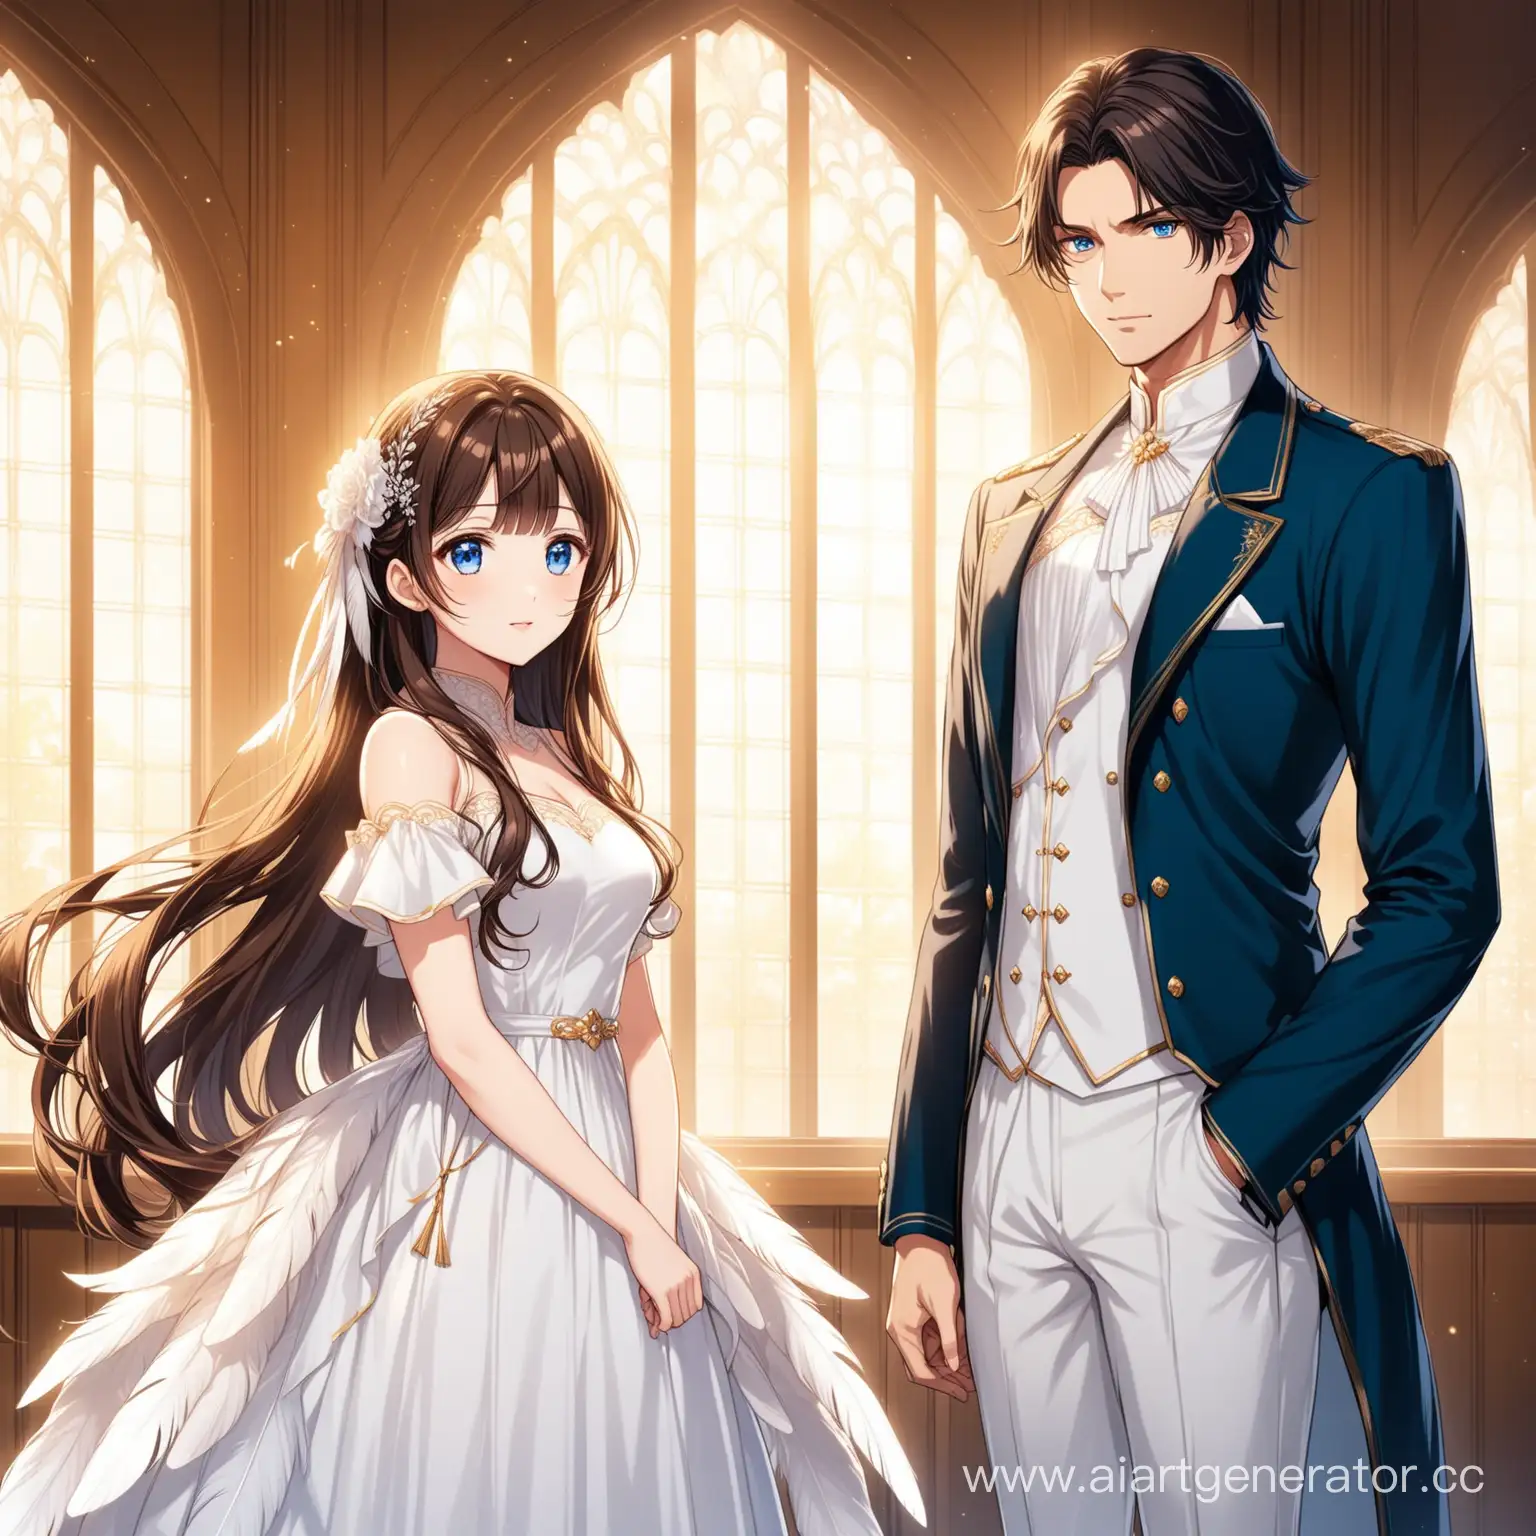 Anime-Characters-in-Elegant-White-Attire-with-Feathers